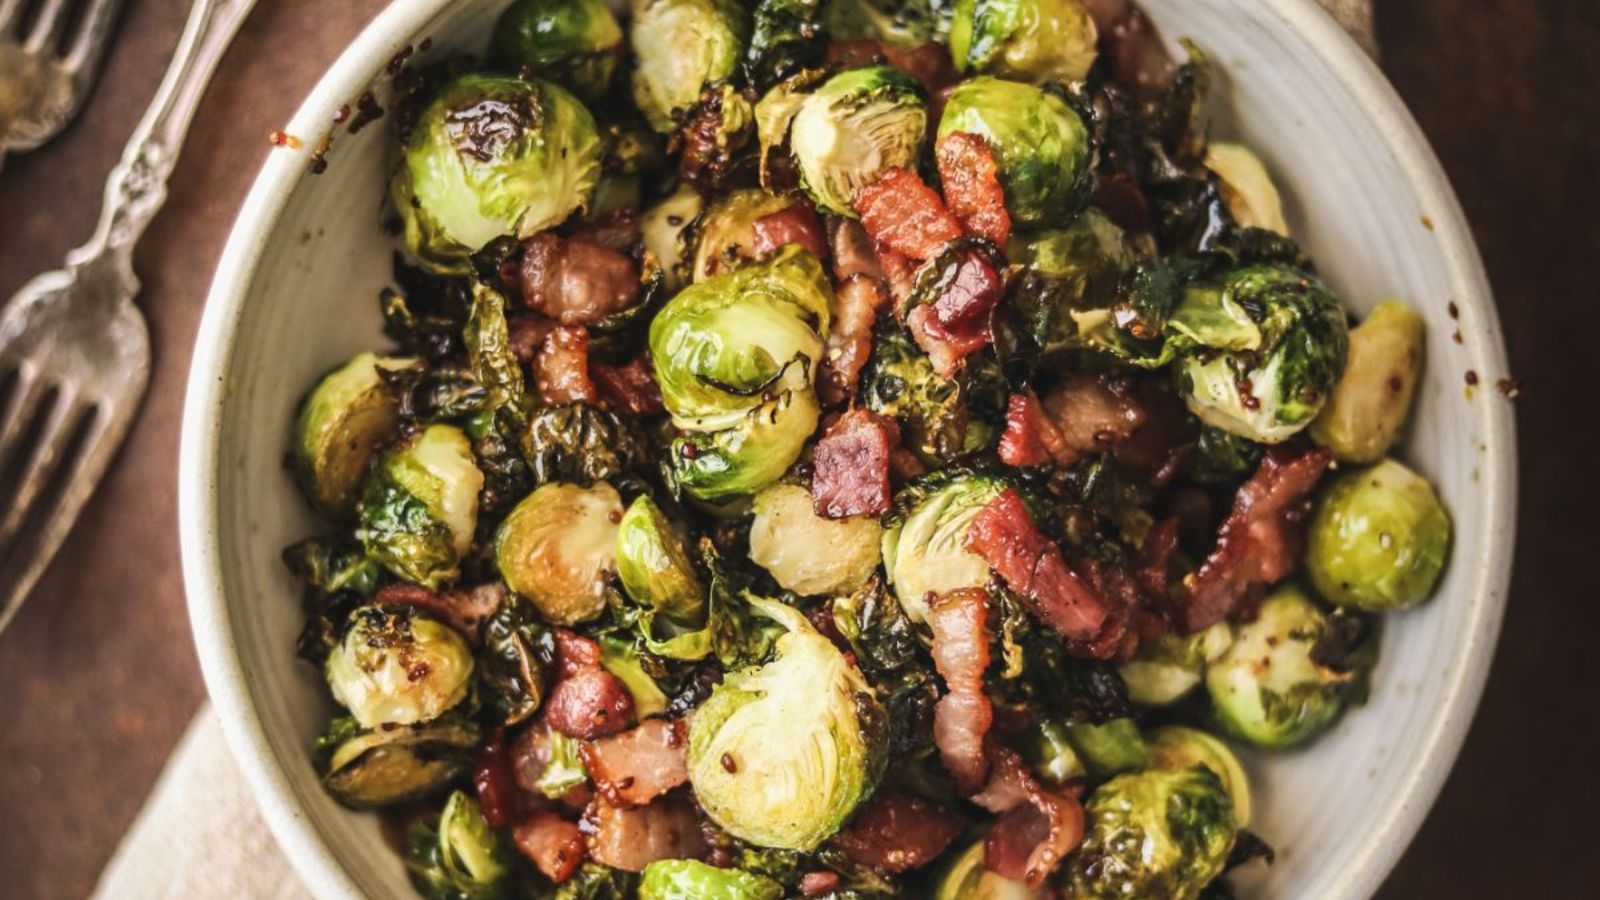 Bracing the Cold: 22 Comforting Sides Perfect for Winter Nights